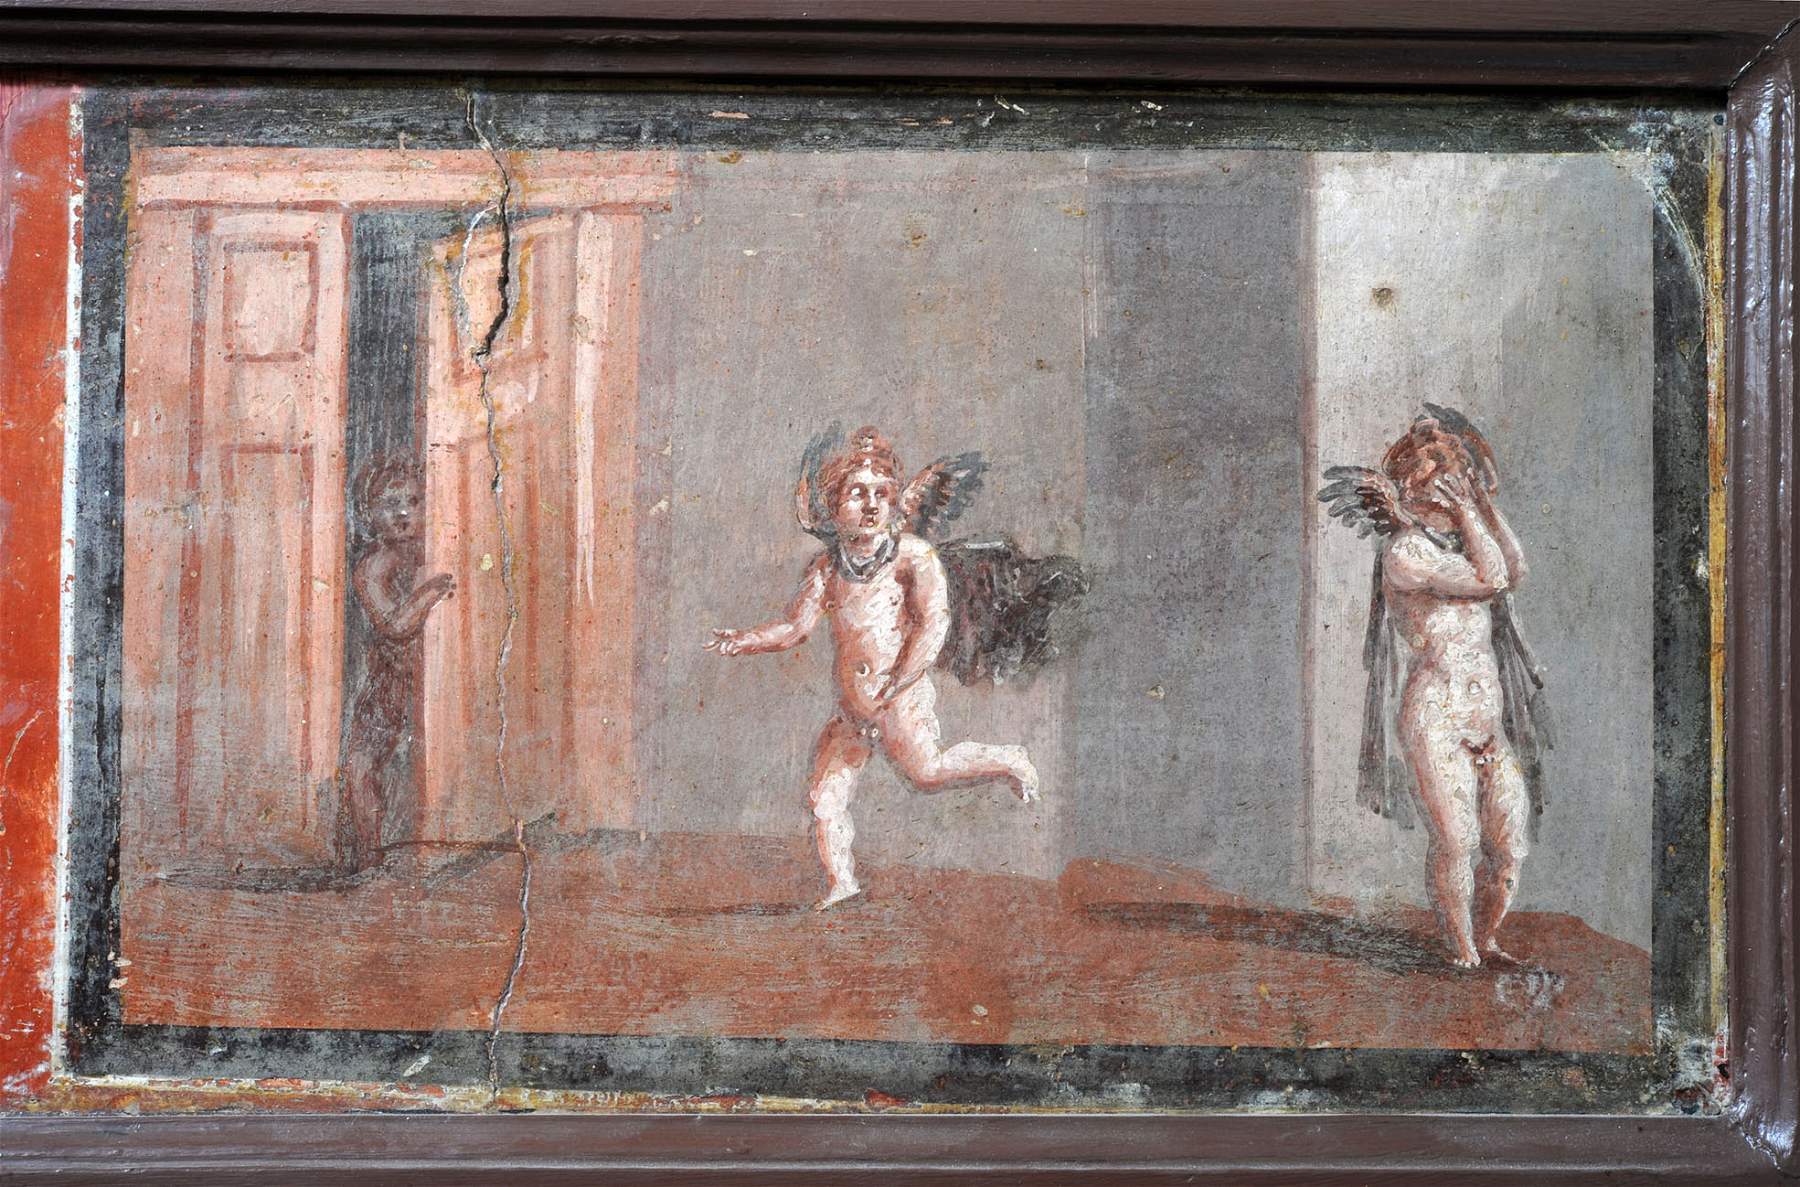 At the MANN in Naples, an exhibition on play in antiquity, also featuring contemporary works 